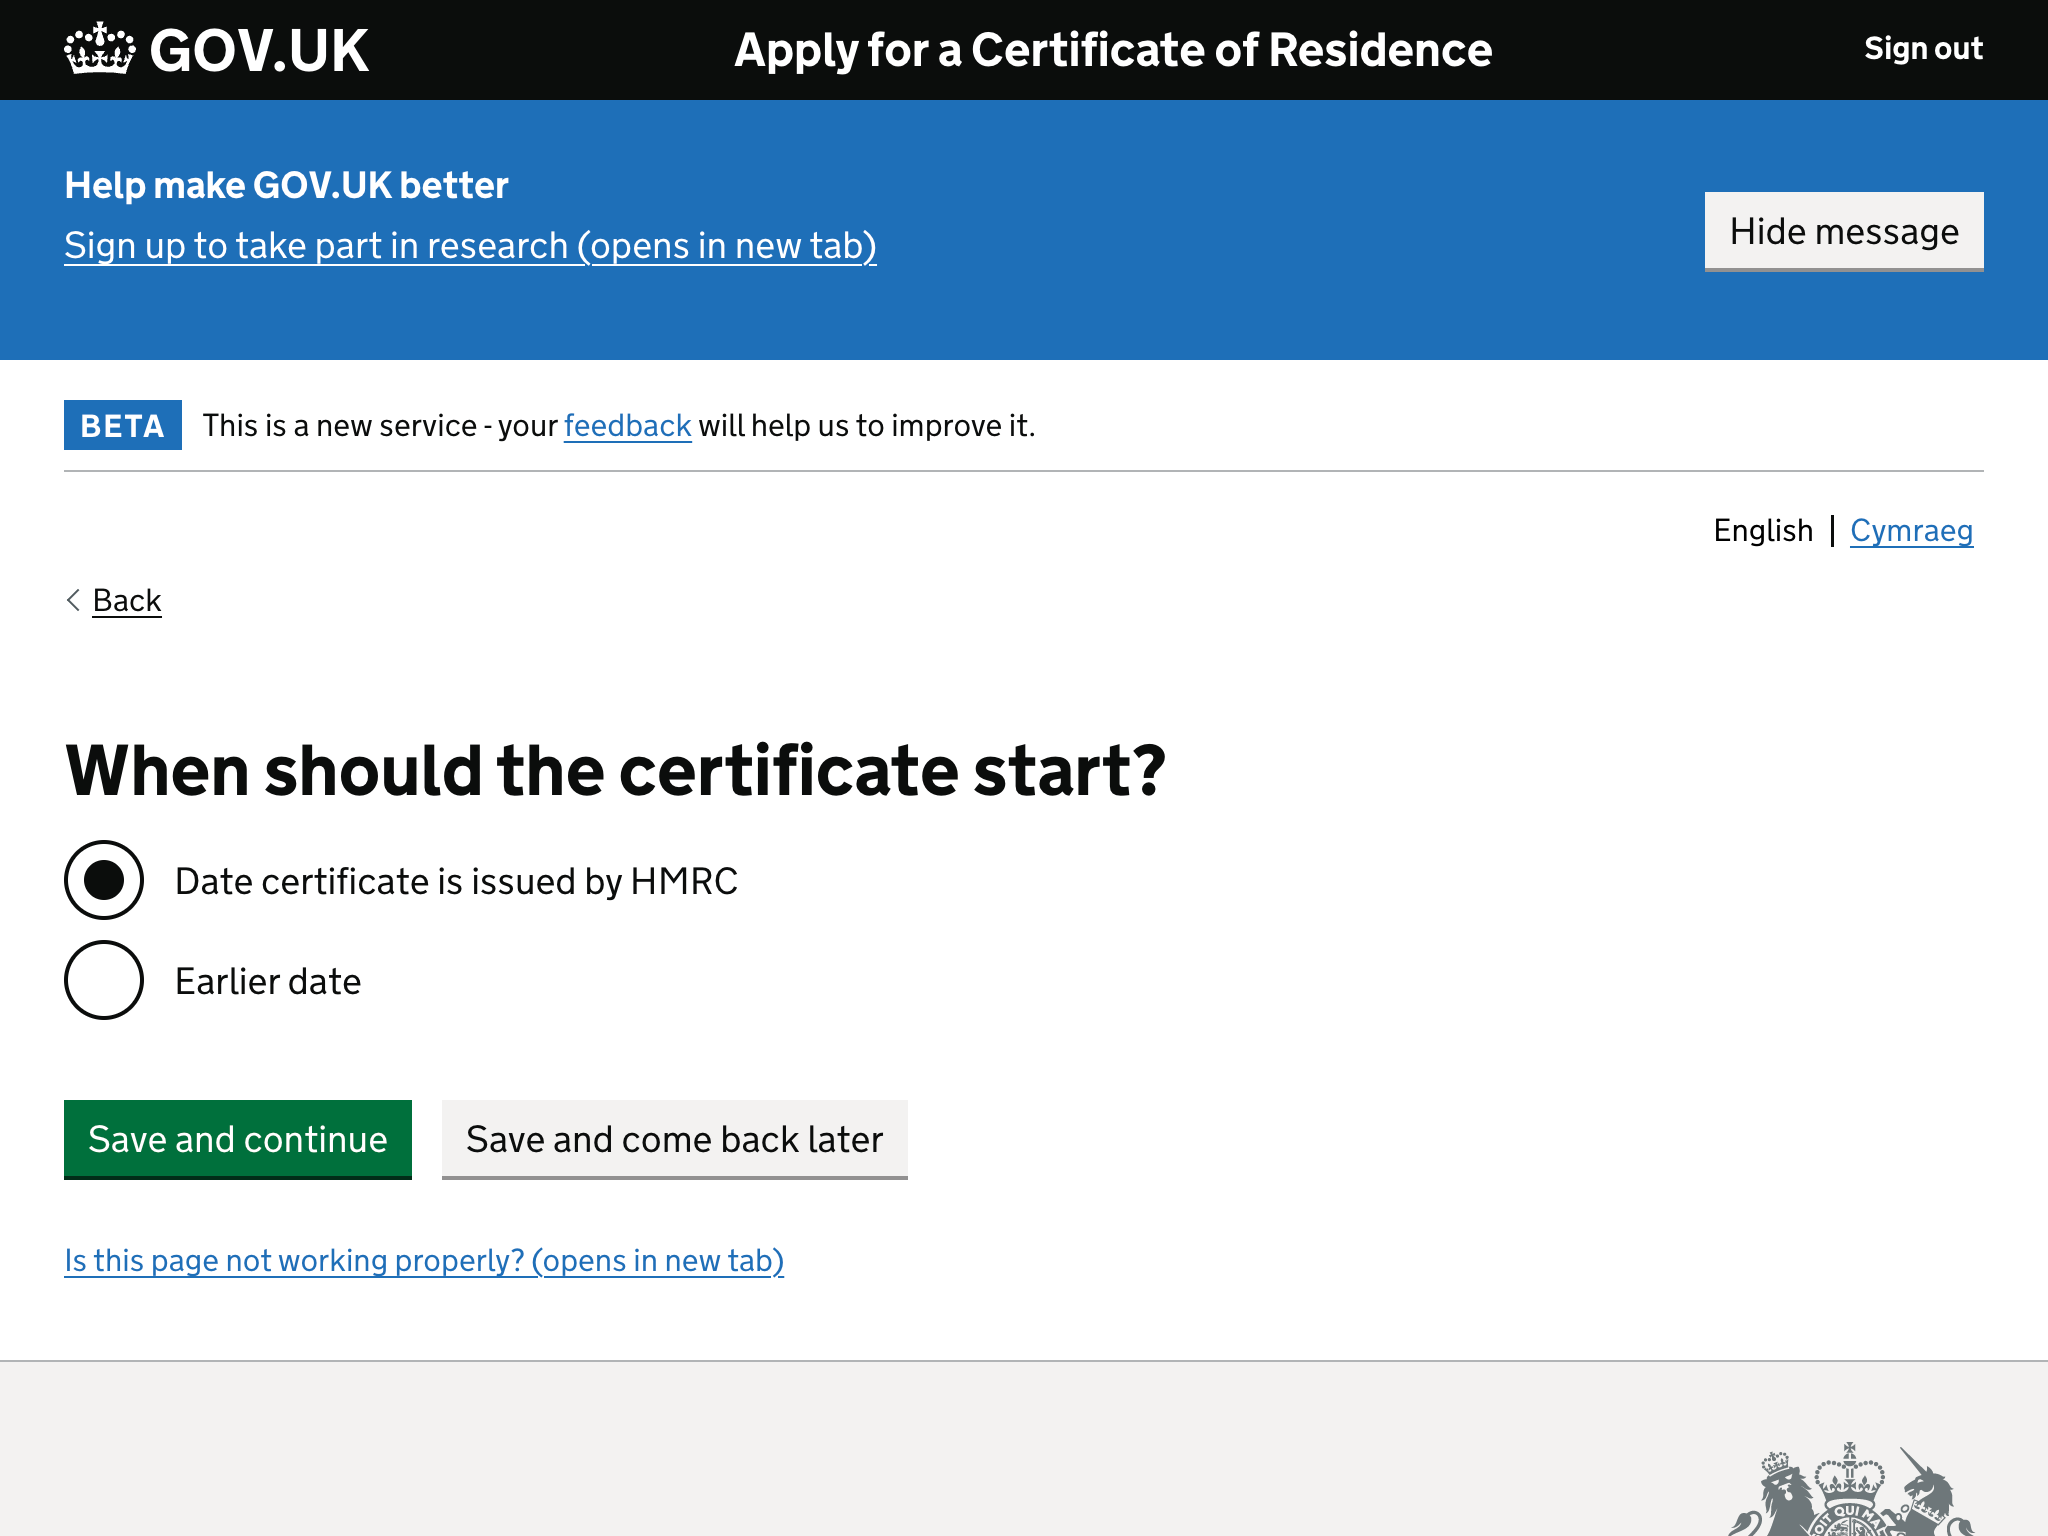 When should the certificate start?